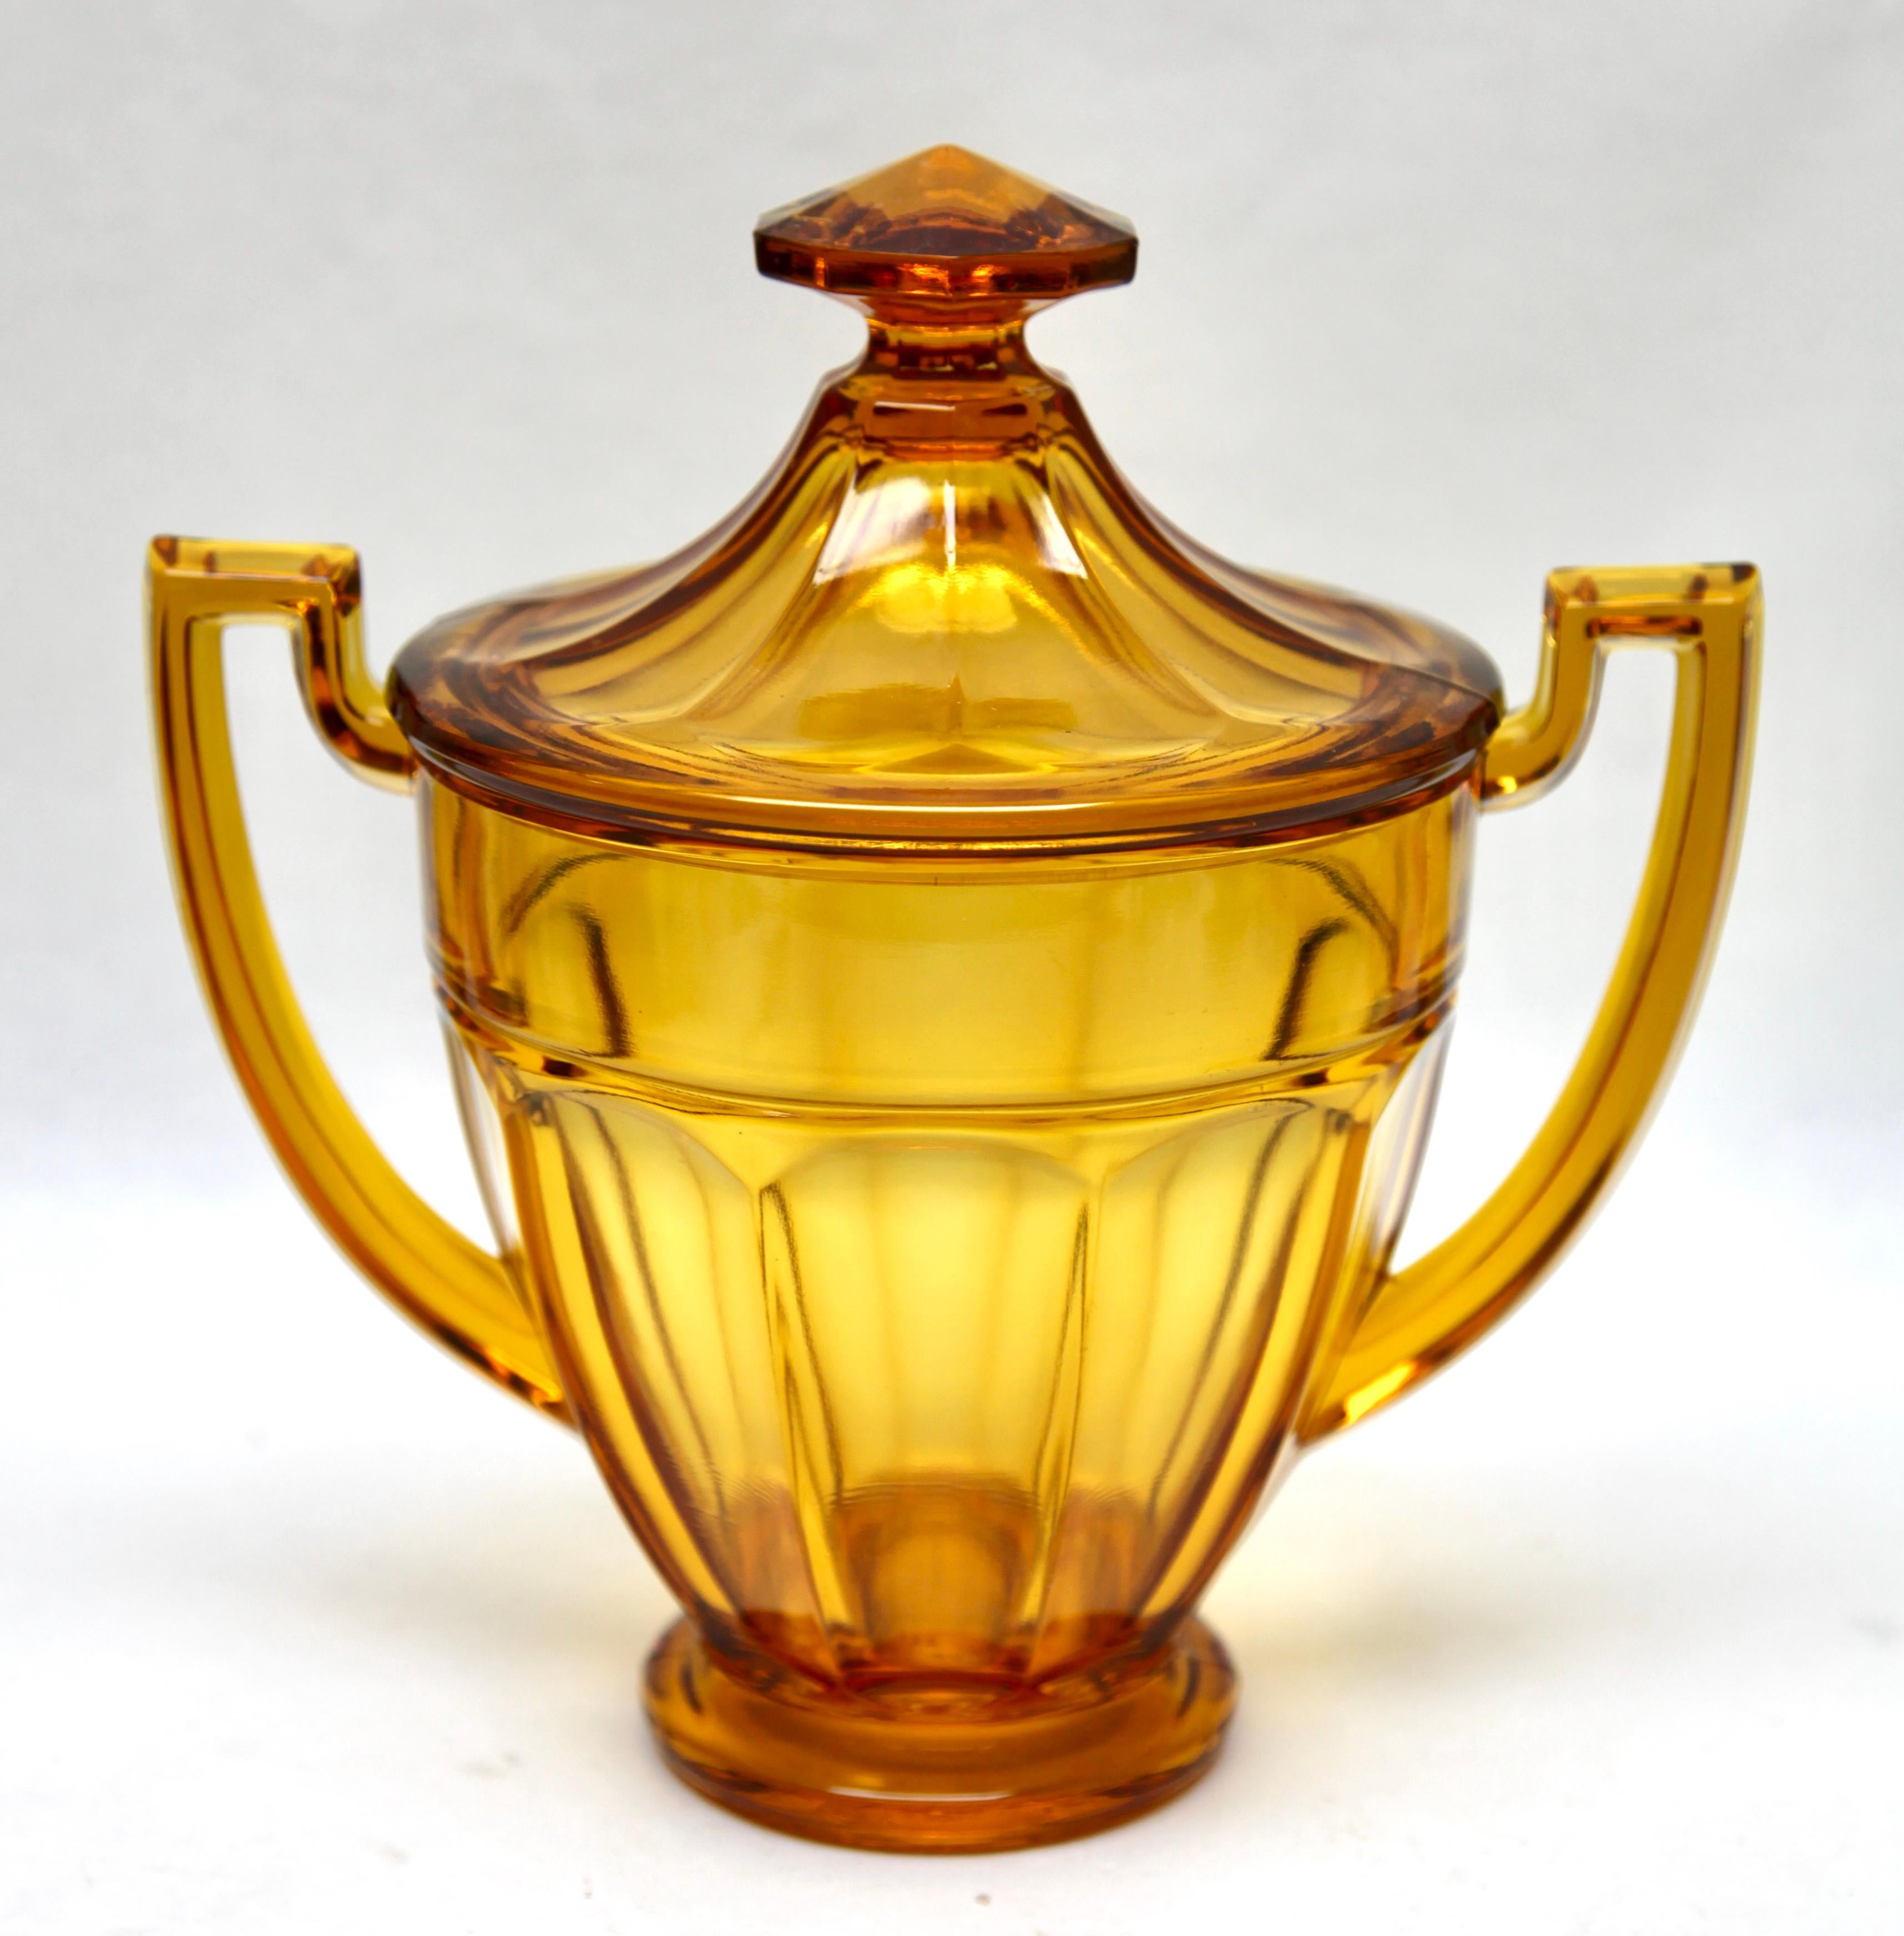 Val Saint Lambert in their Luxval series, in the 1930s. The vase is marked on the inside: 